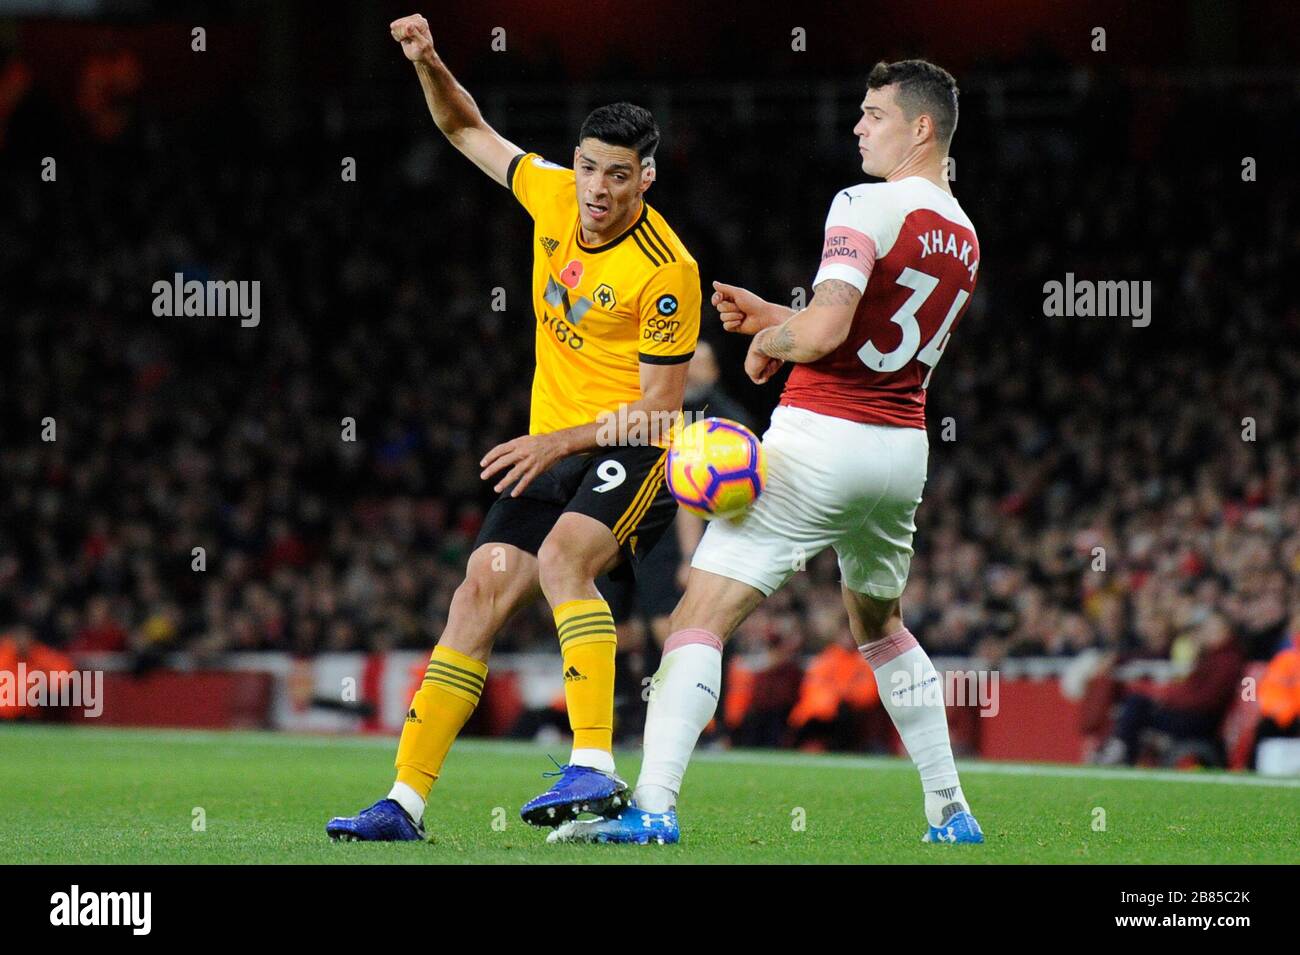 Granit Xhaka of Arsenal and Raœl Jiminez of Wolverhampton Wanderers in action during the Premier League match between Arsenal and Wolverhampton Wanderers at Emirates Stadium in London, UK - 11th November 2018 Stock Photo